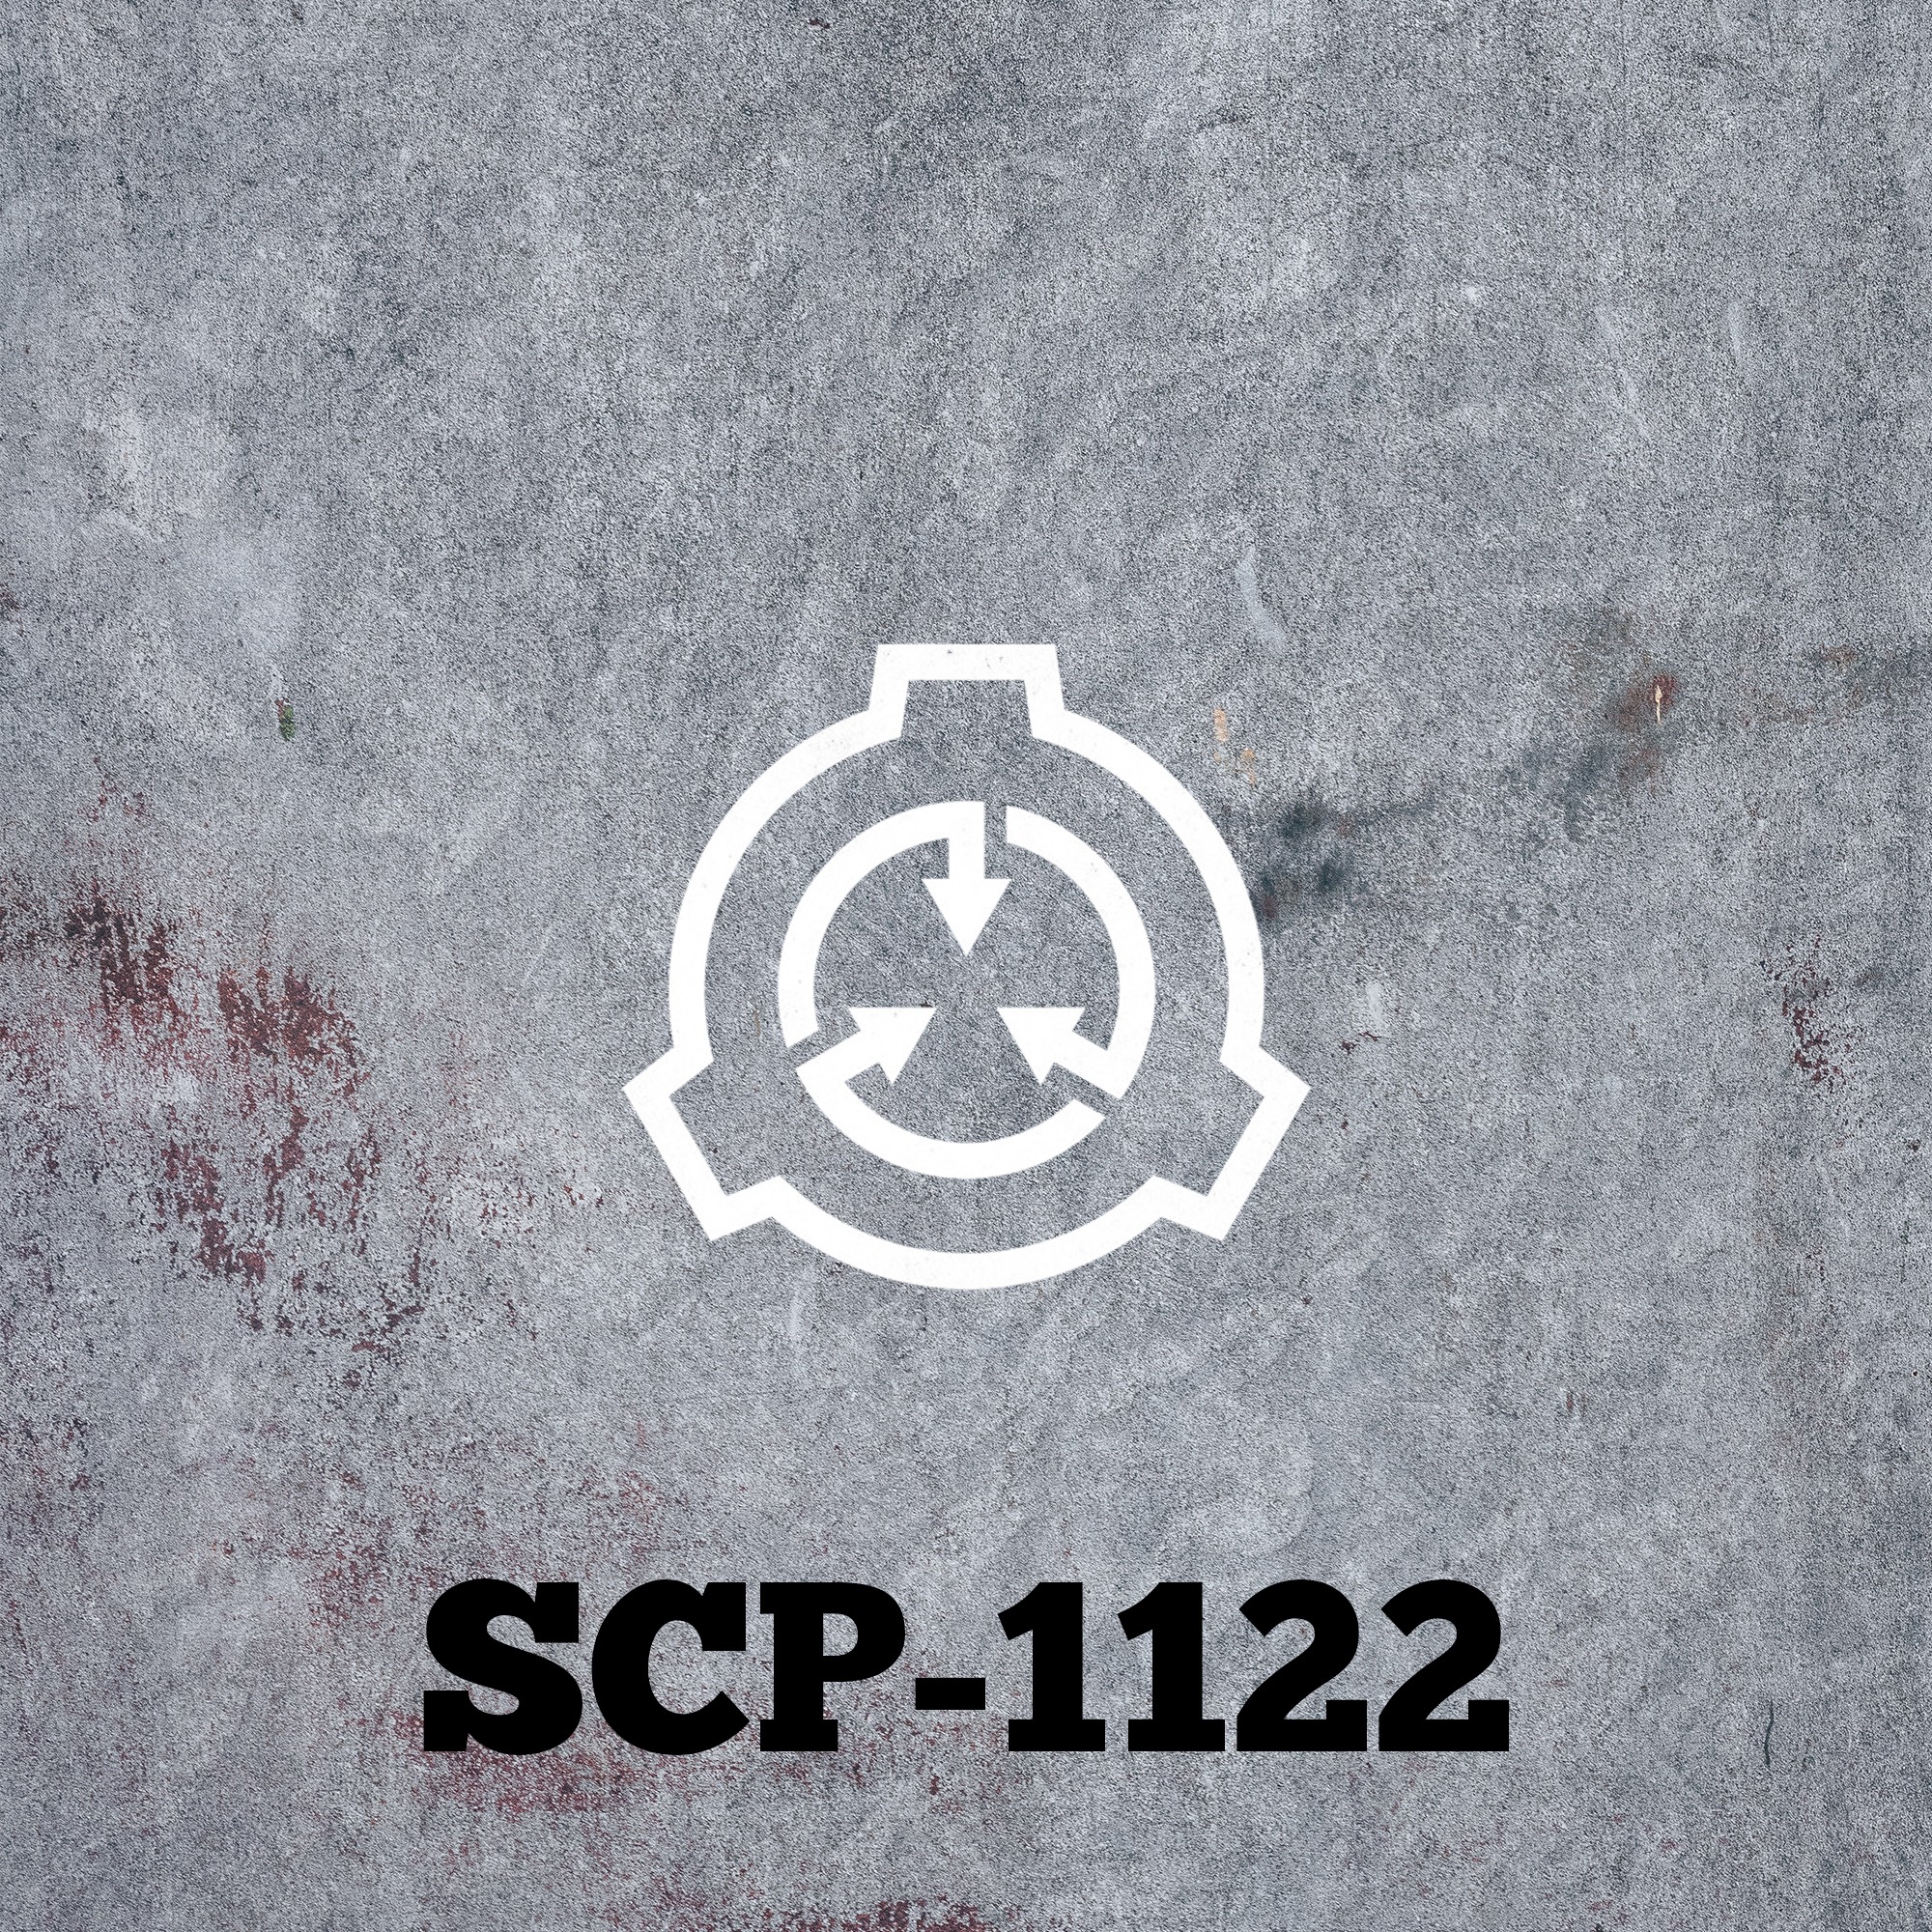 Dr. Roget's Personnel File - SCP Foundation